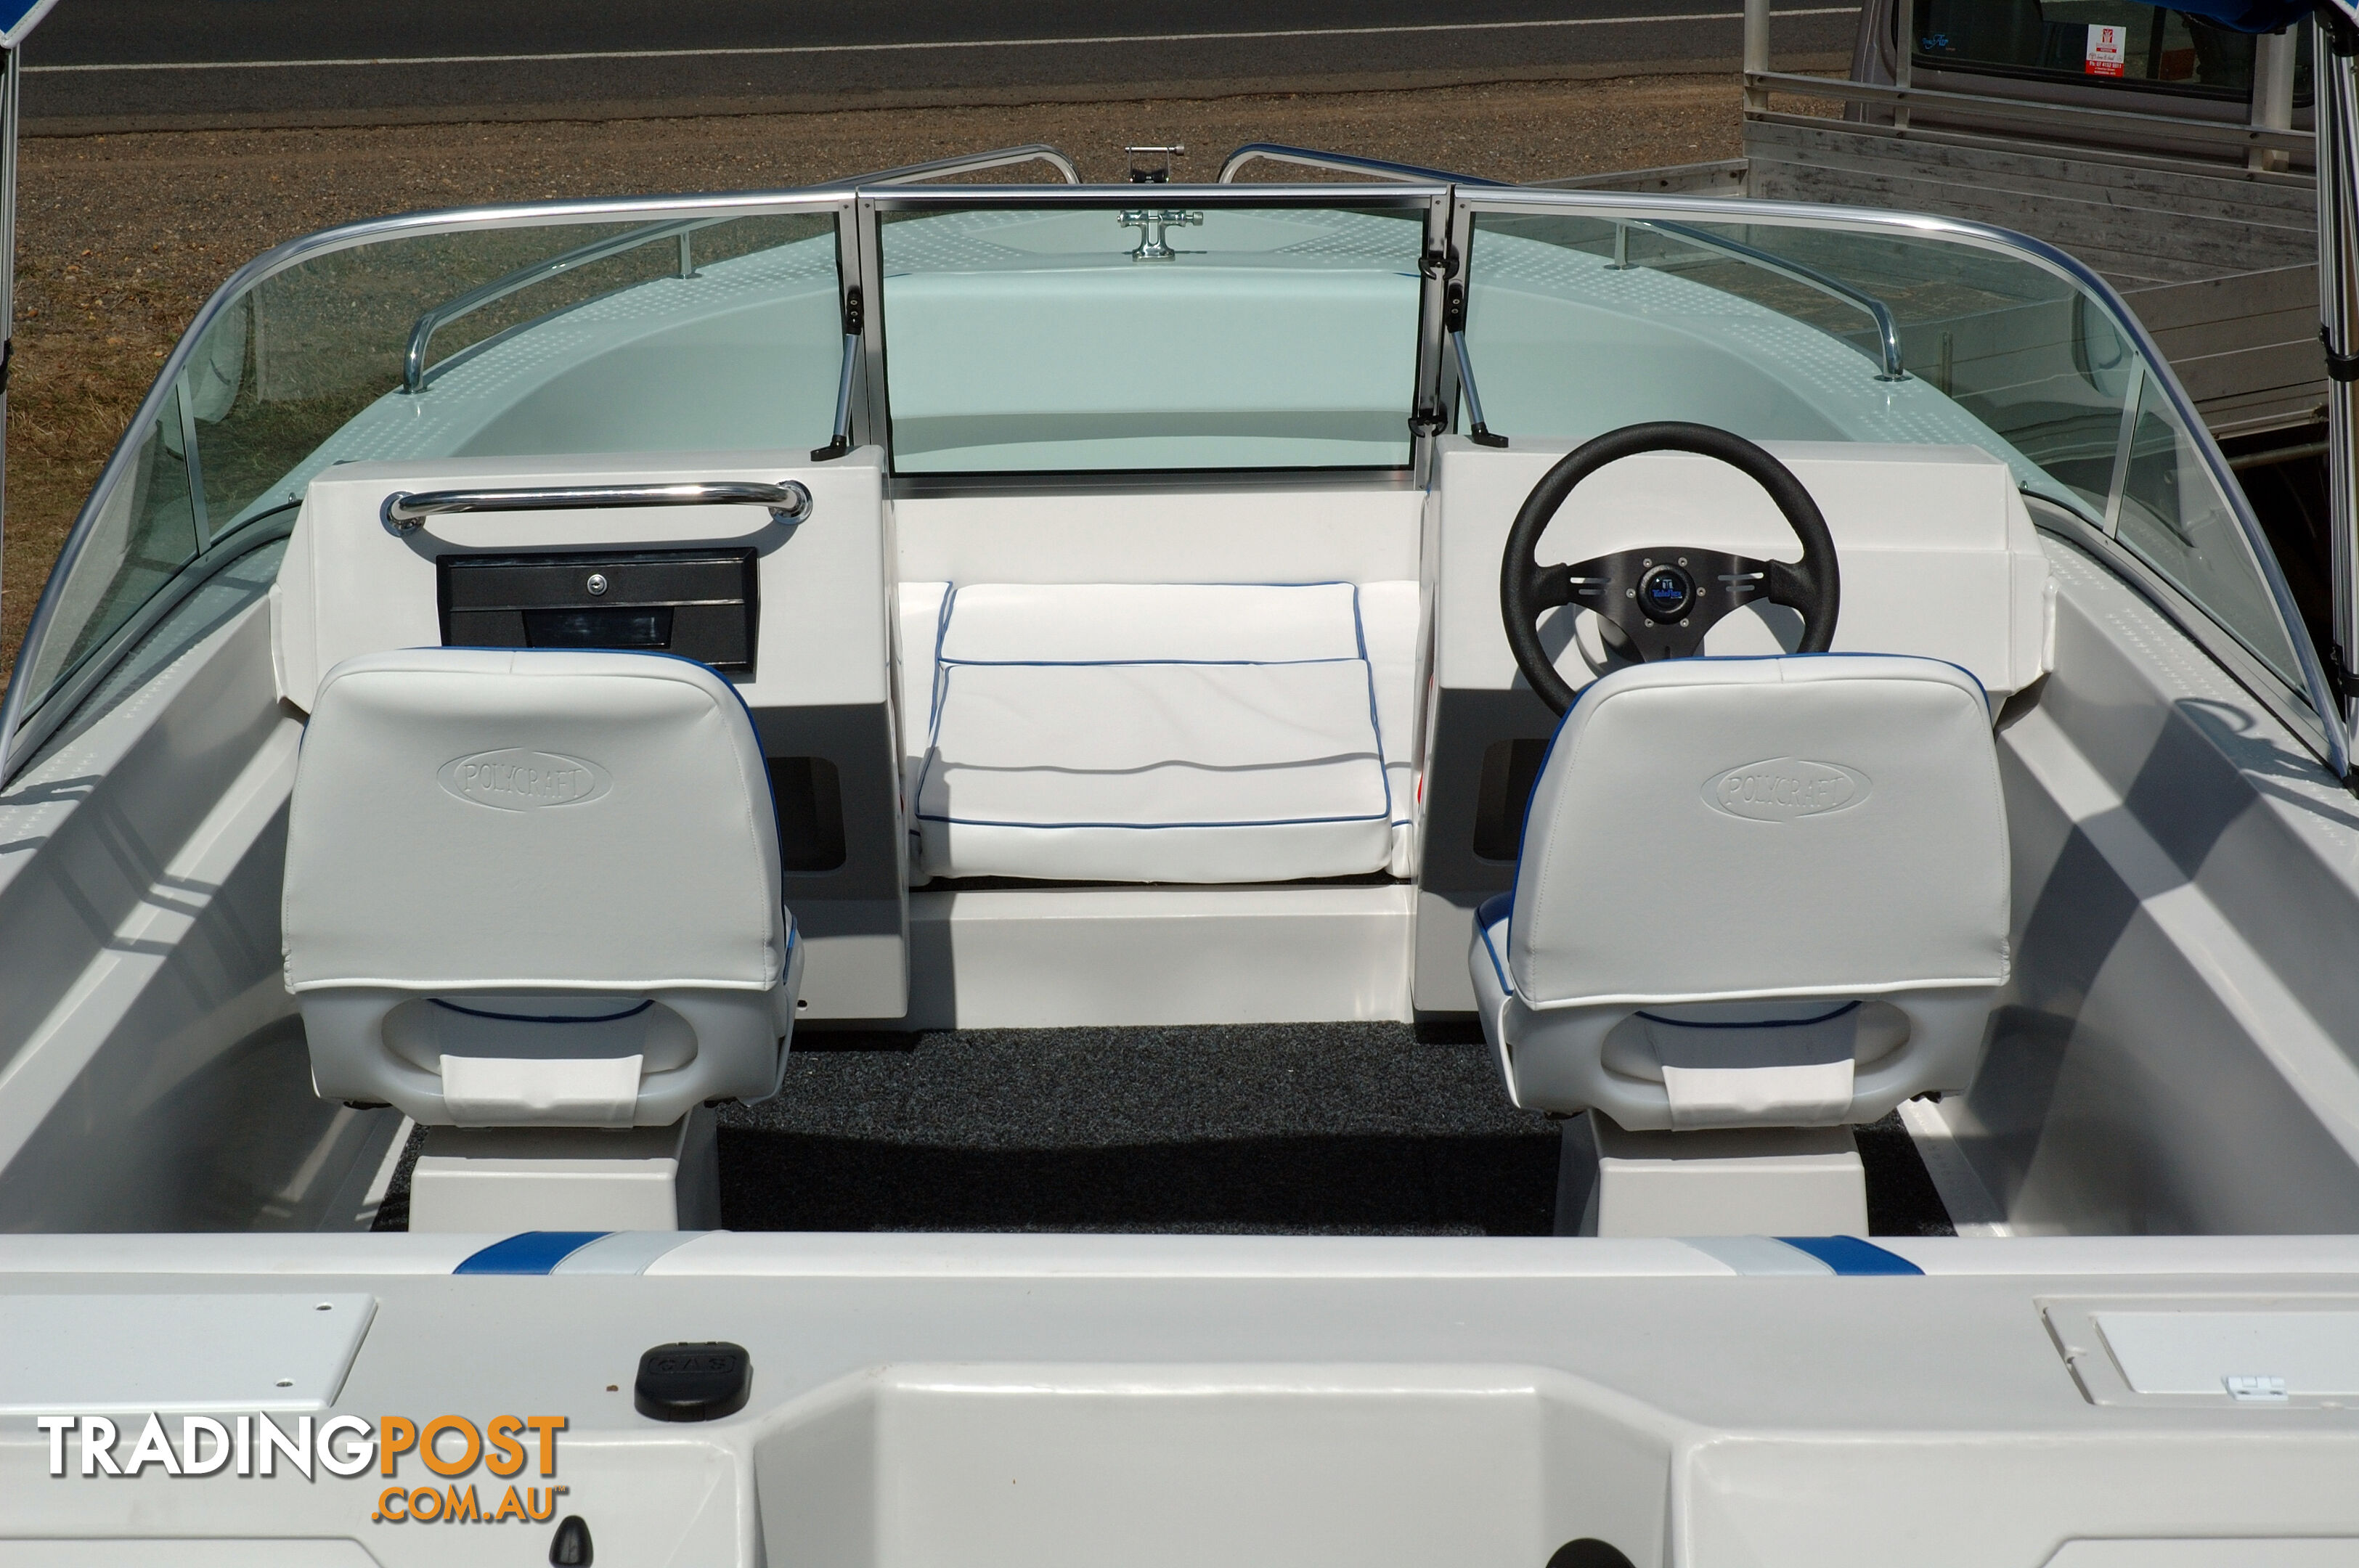 New Polycraft 530 Front Runner  Powered by the Yamaha F115 Pack 2